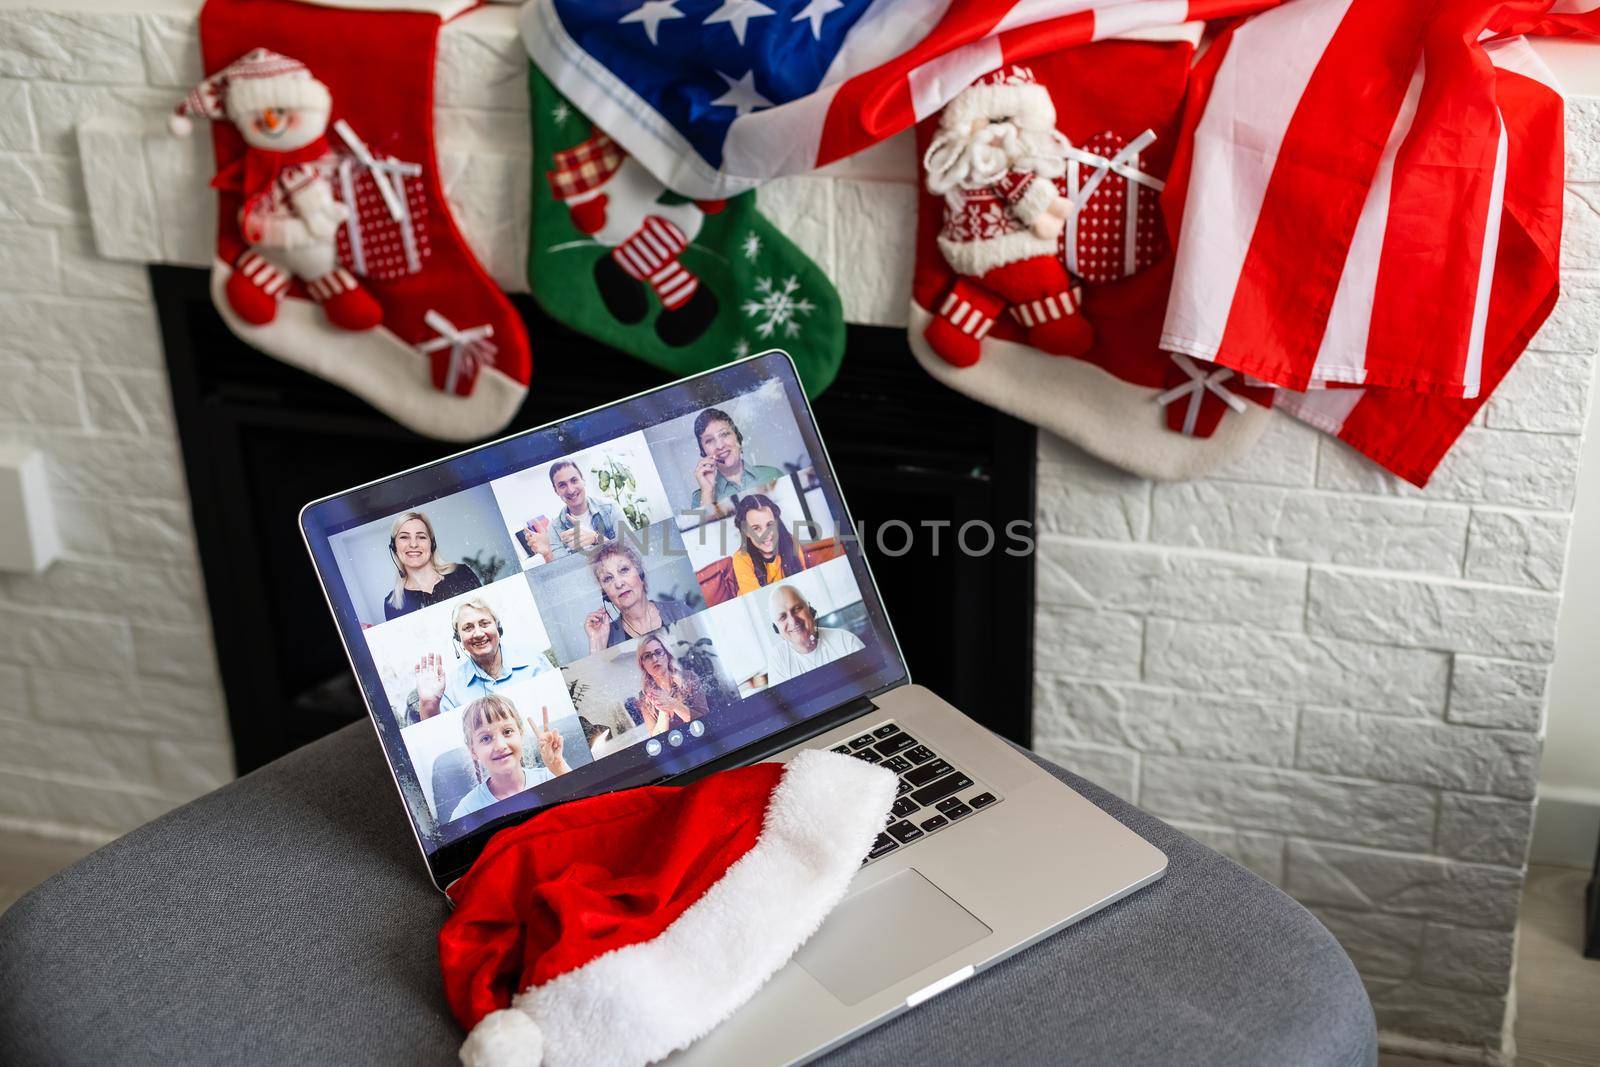 Virtual Christmas tree meeting team teleworking. Family video call remote conference. Laptop webcam screen view. Team meet working from their home offices. Happy hour party online woman team diversity by Andelov13